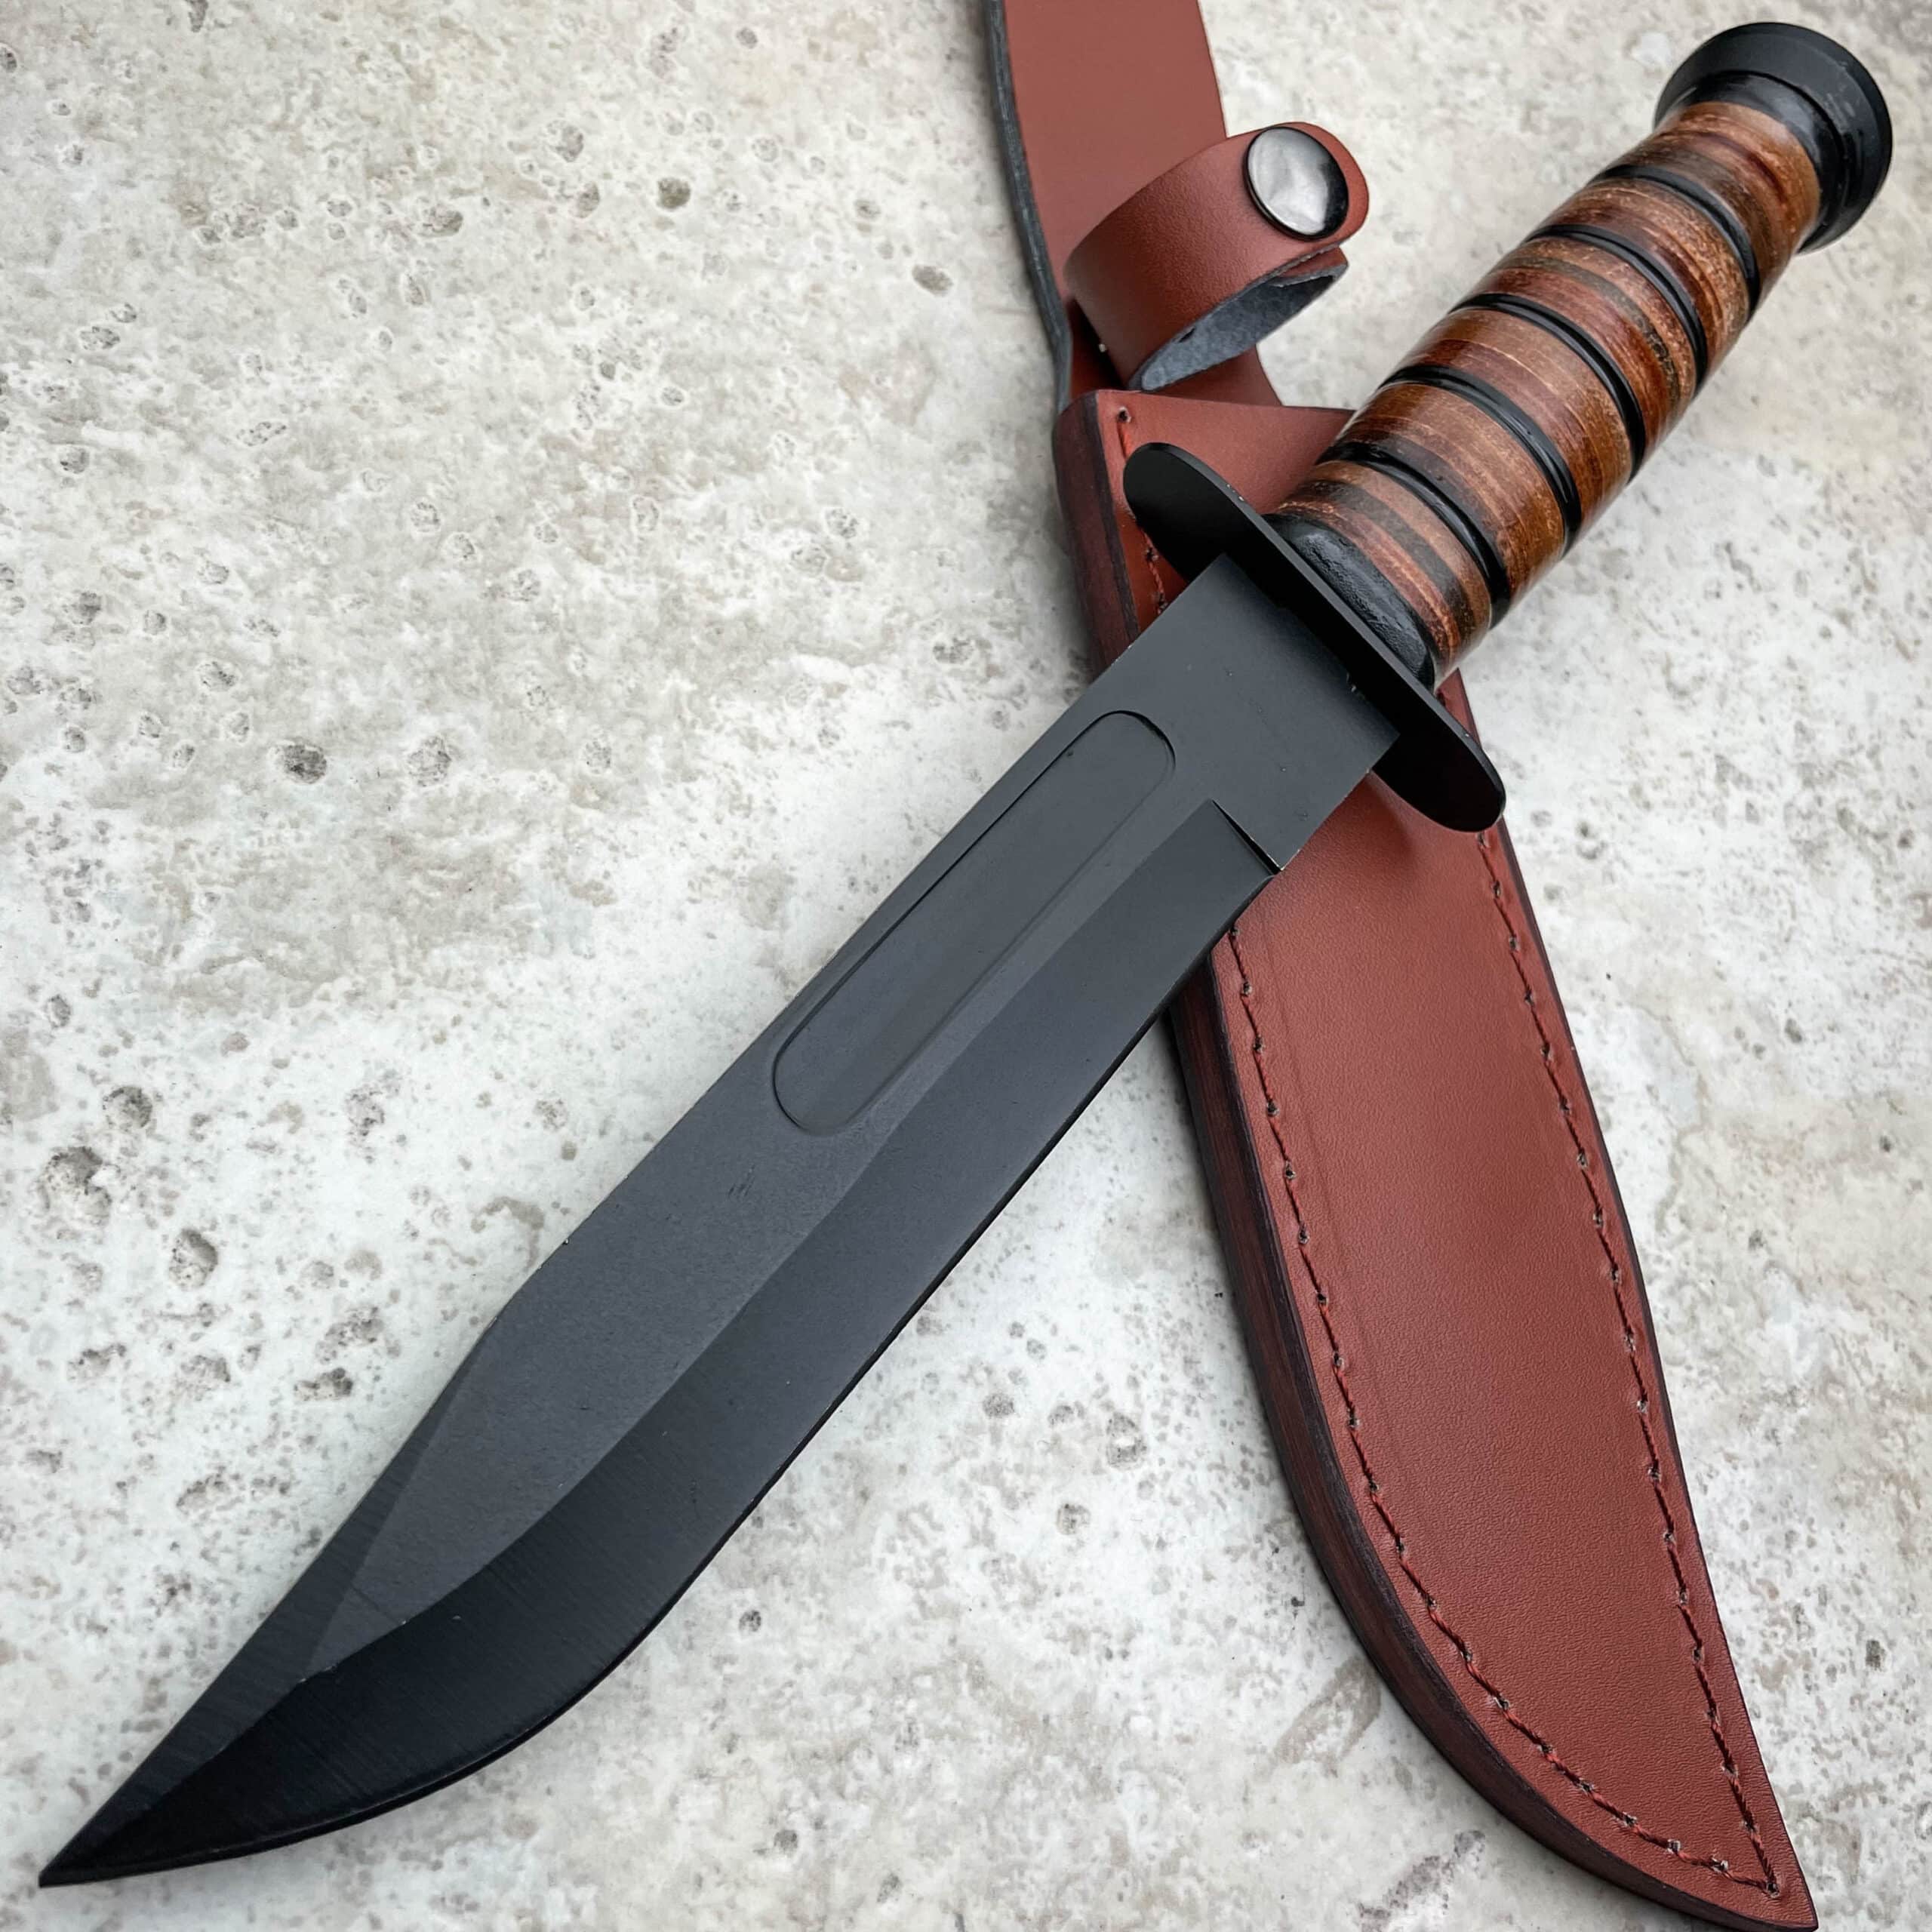 12" Military Tactical WWII COMBAT Fixed Blade Survival Hunting KNIFE w/ Sheath